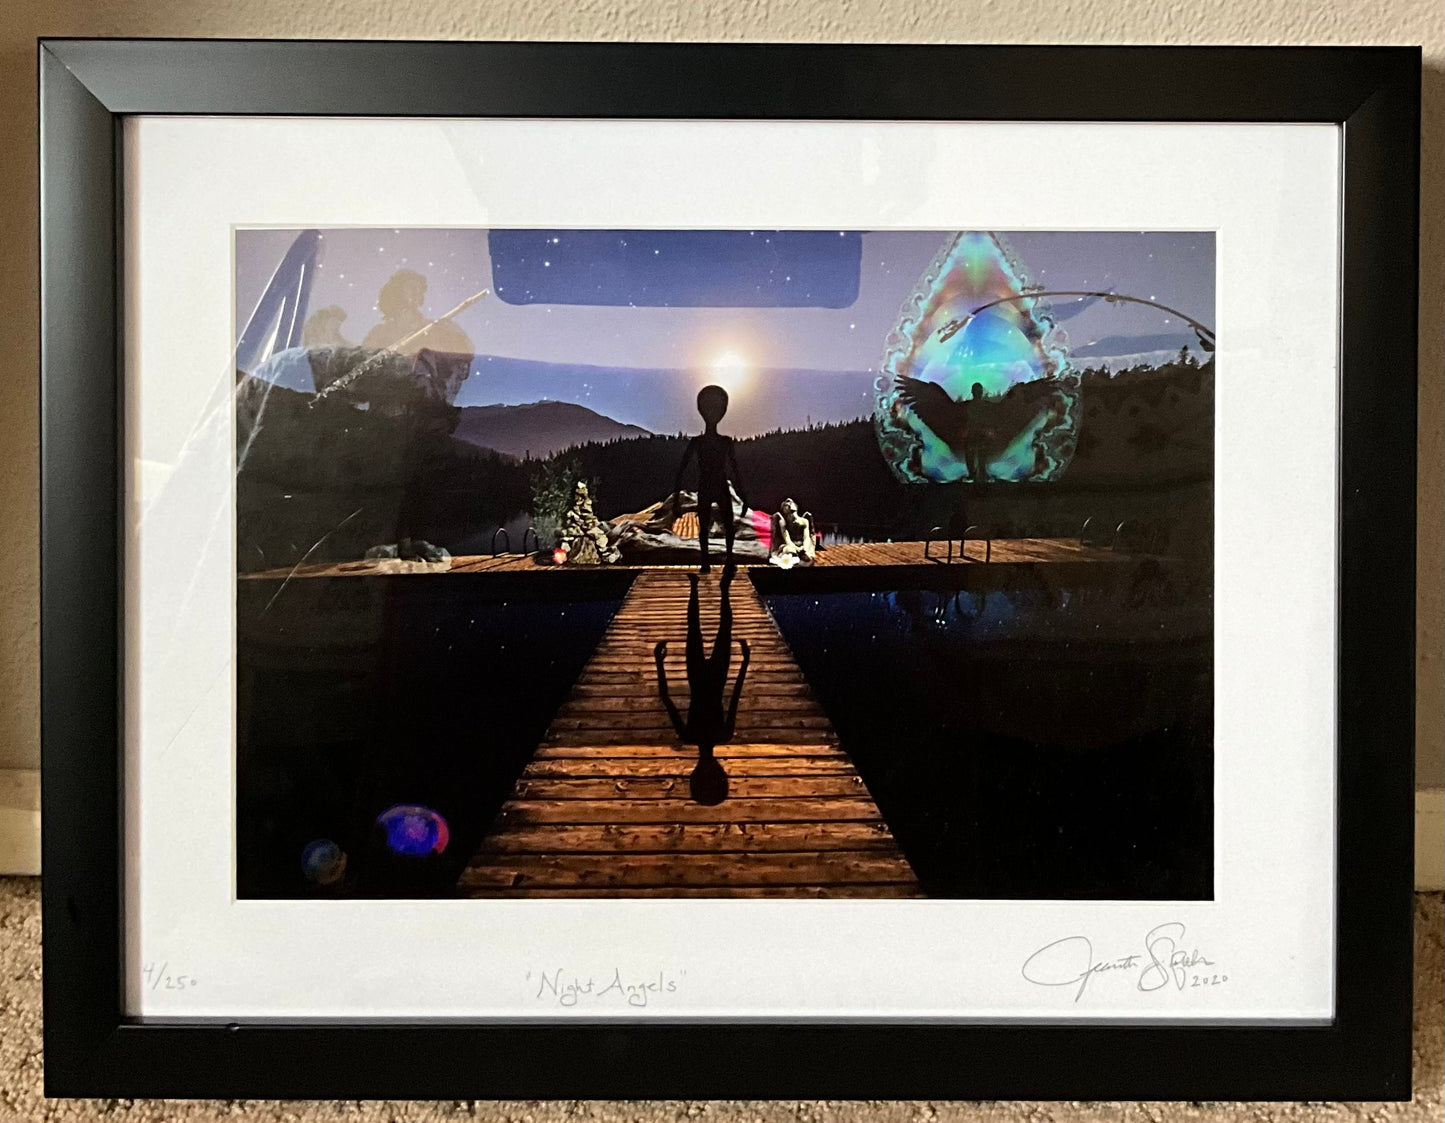 “Night Angels” - 1st Edition Print 4/250 14”x18” Framed and Matted